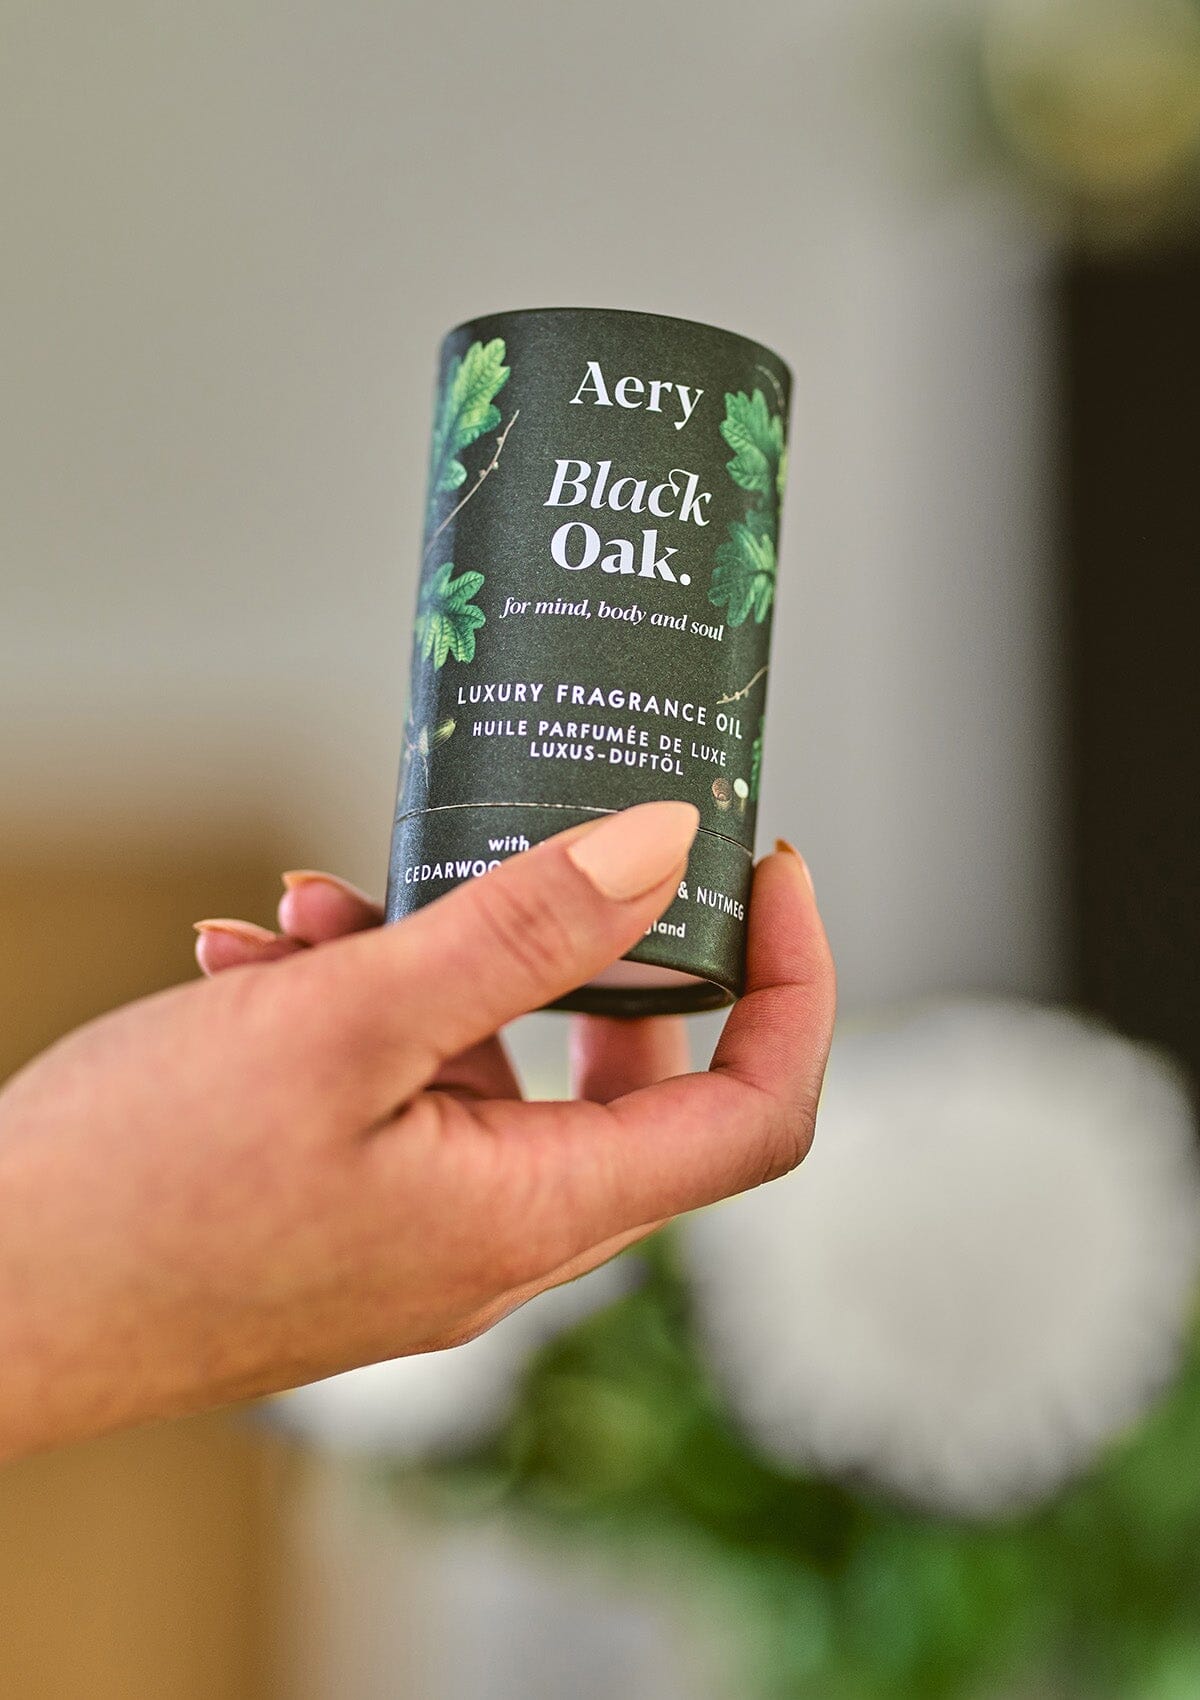 Green Black Oak fragrance oil product packaging by Aery displayed in hand 